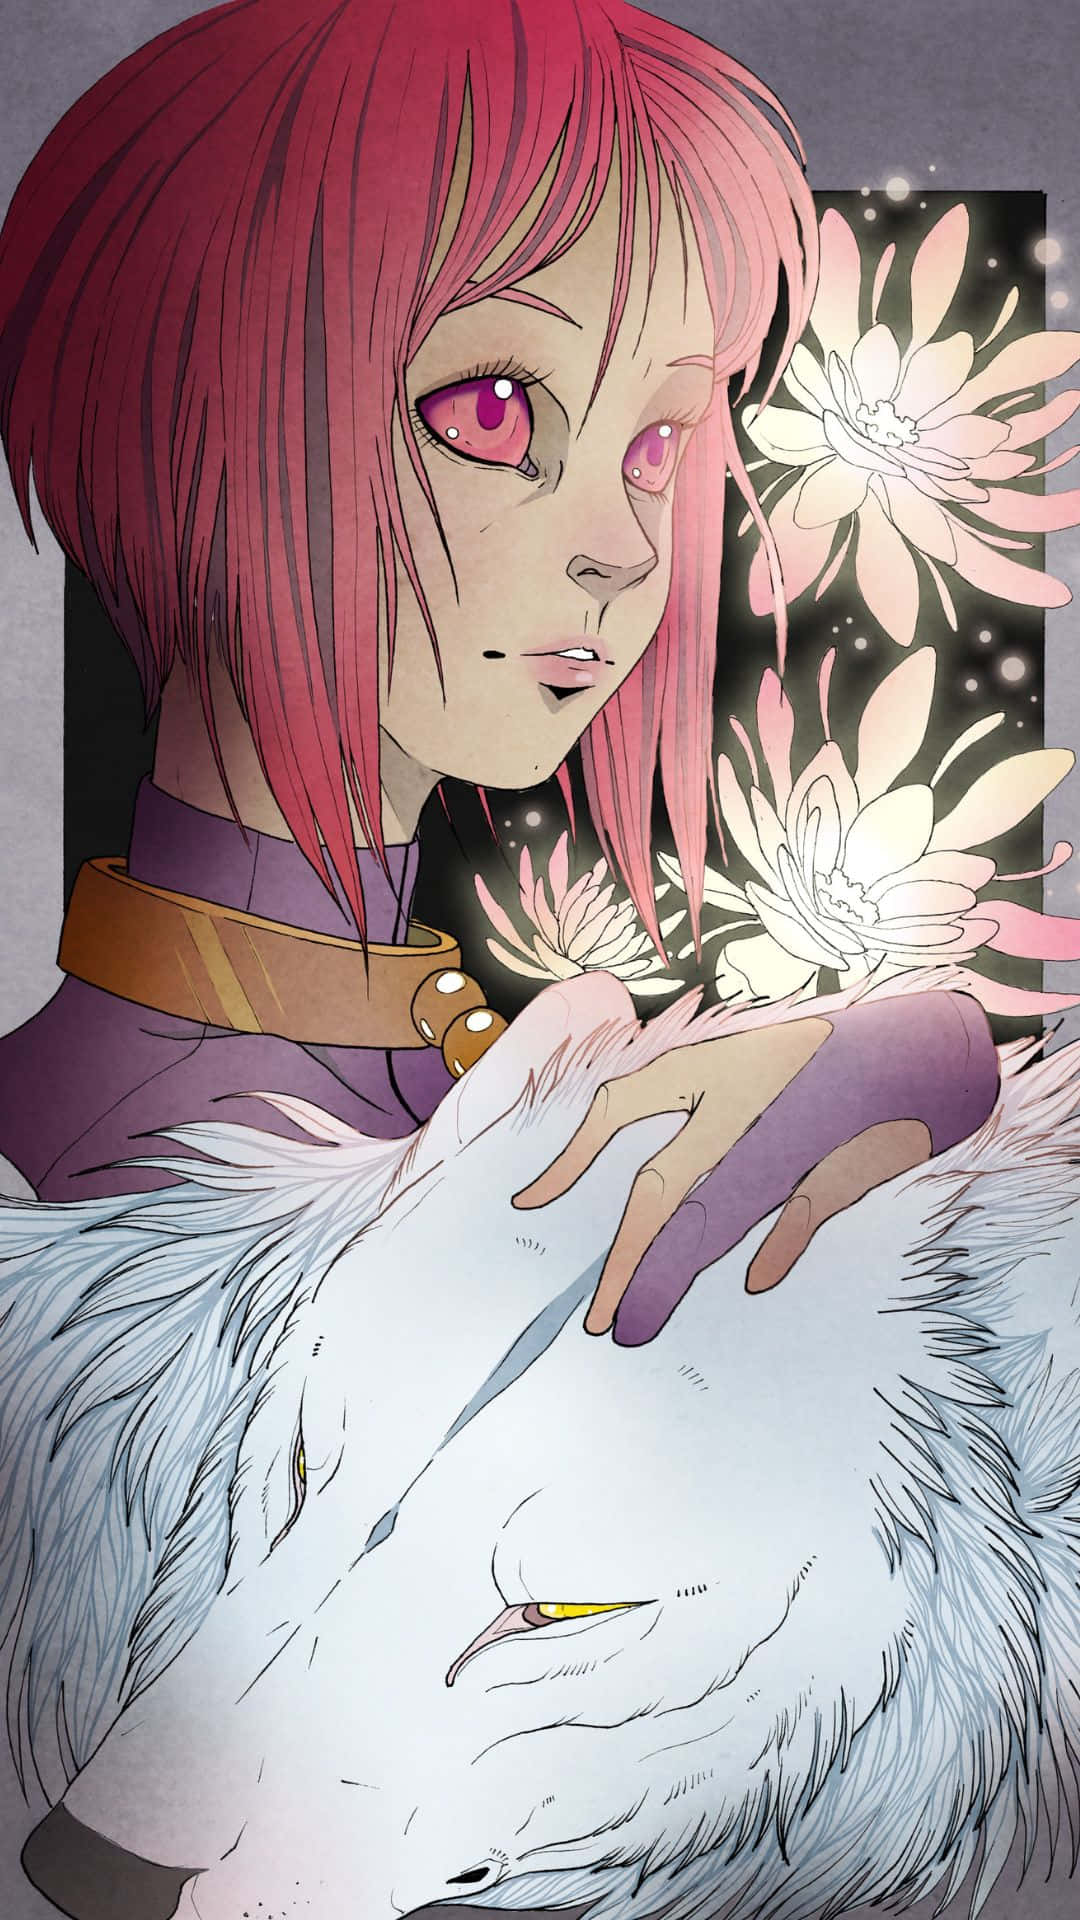 Cheza, The Flower Maiden, in the Enigmatic World of Wolf's Rain Wallpaper